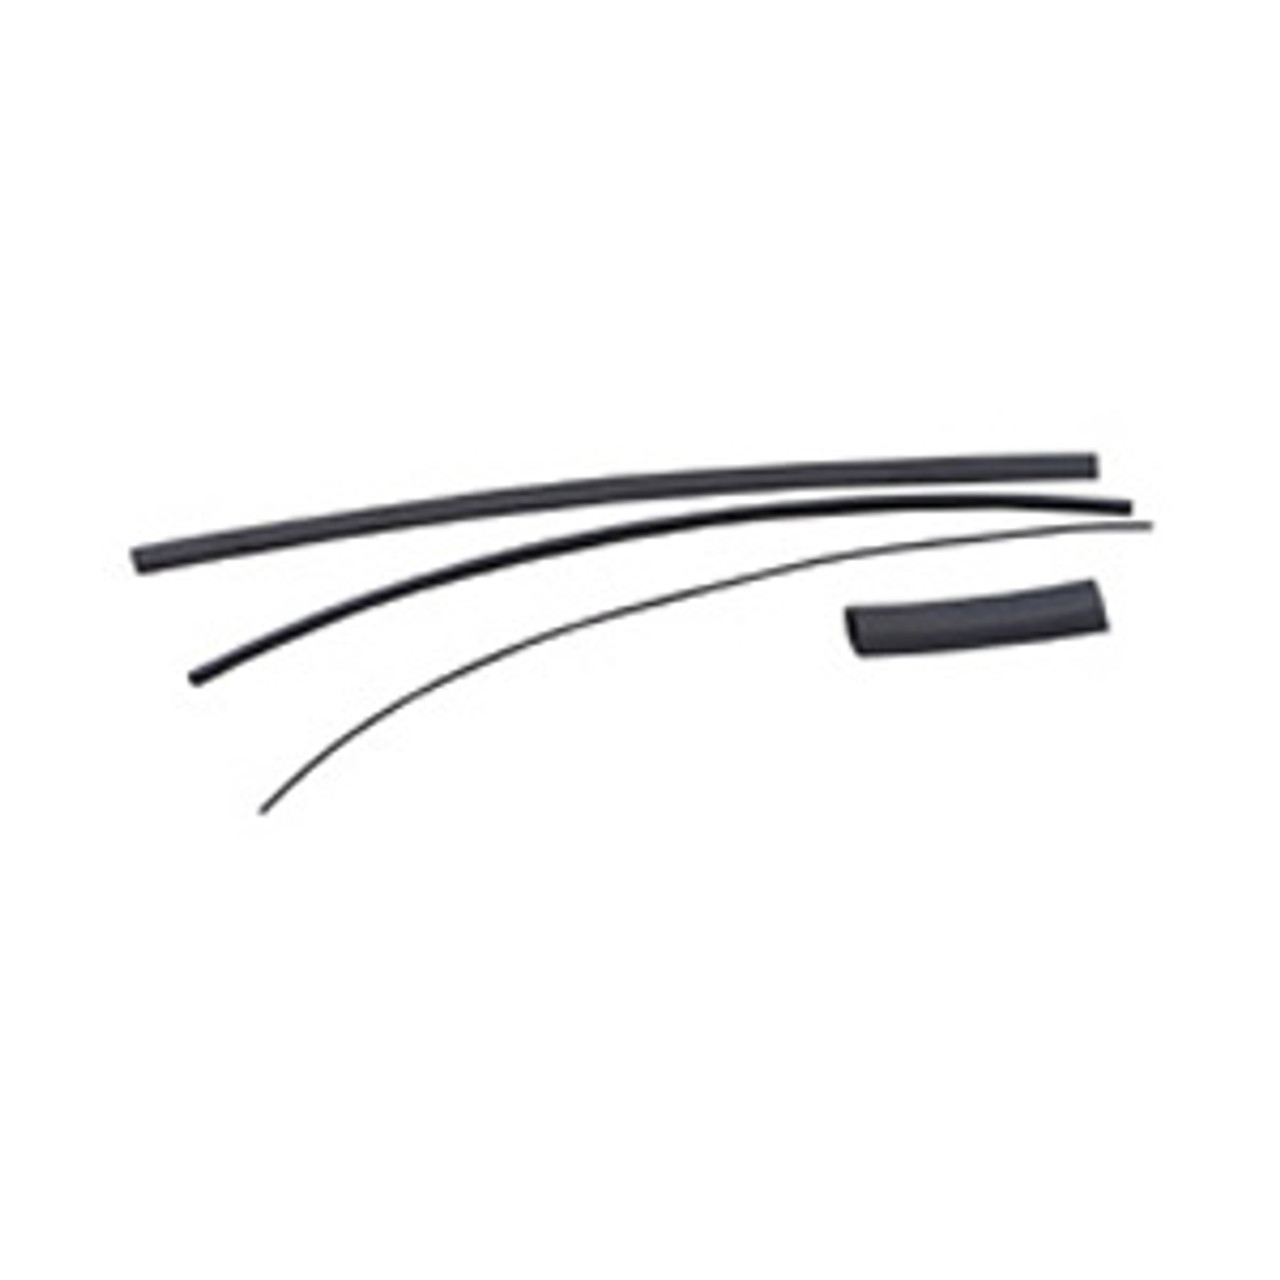 Ideal 46-316 - 1/4" OD Thermo-Shrink Thin-Wall Heat Shrink